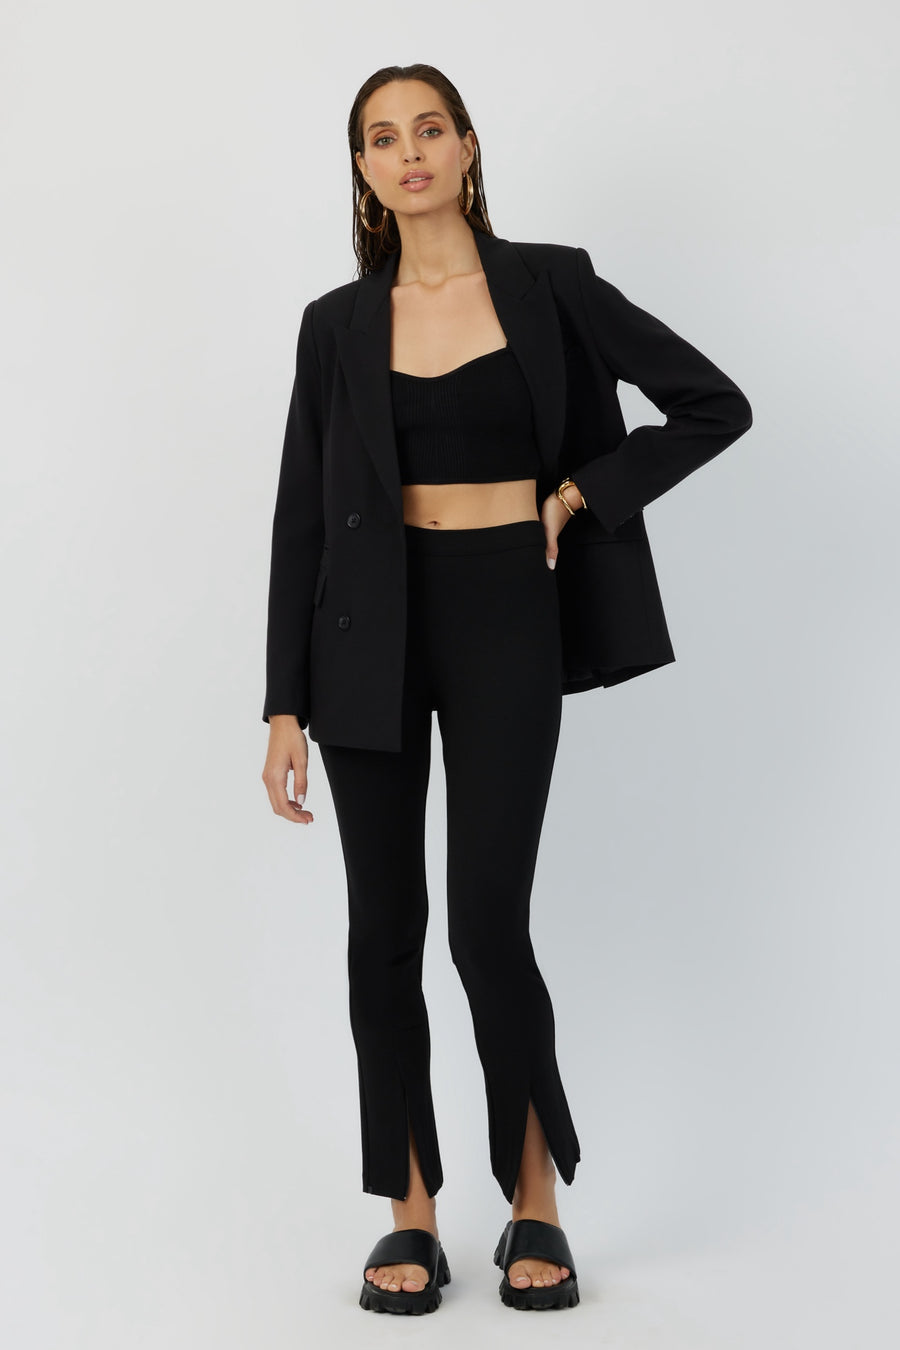 THE MULBERRY DOUBLE BREASTED BLAZER - BLACK